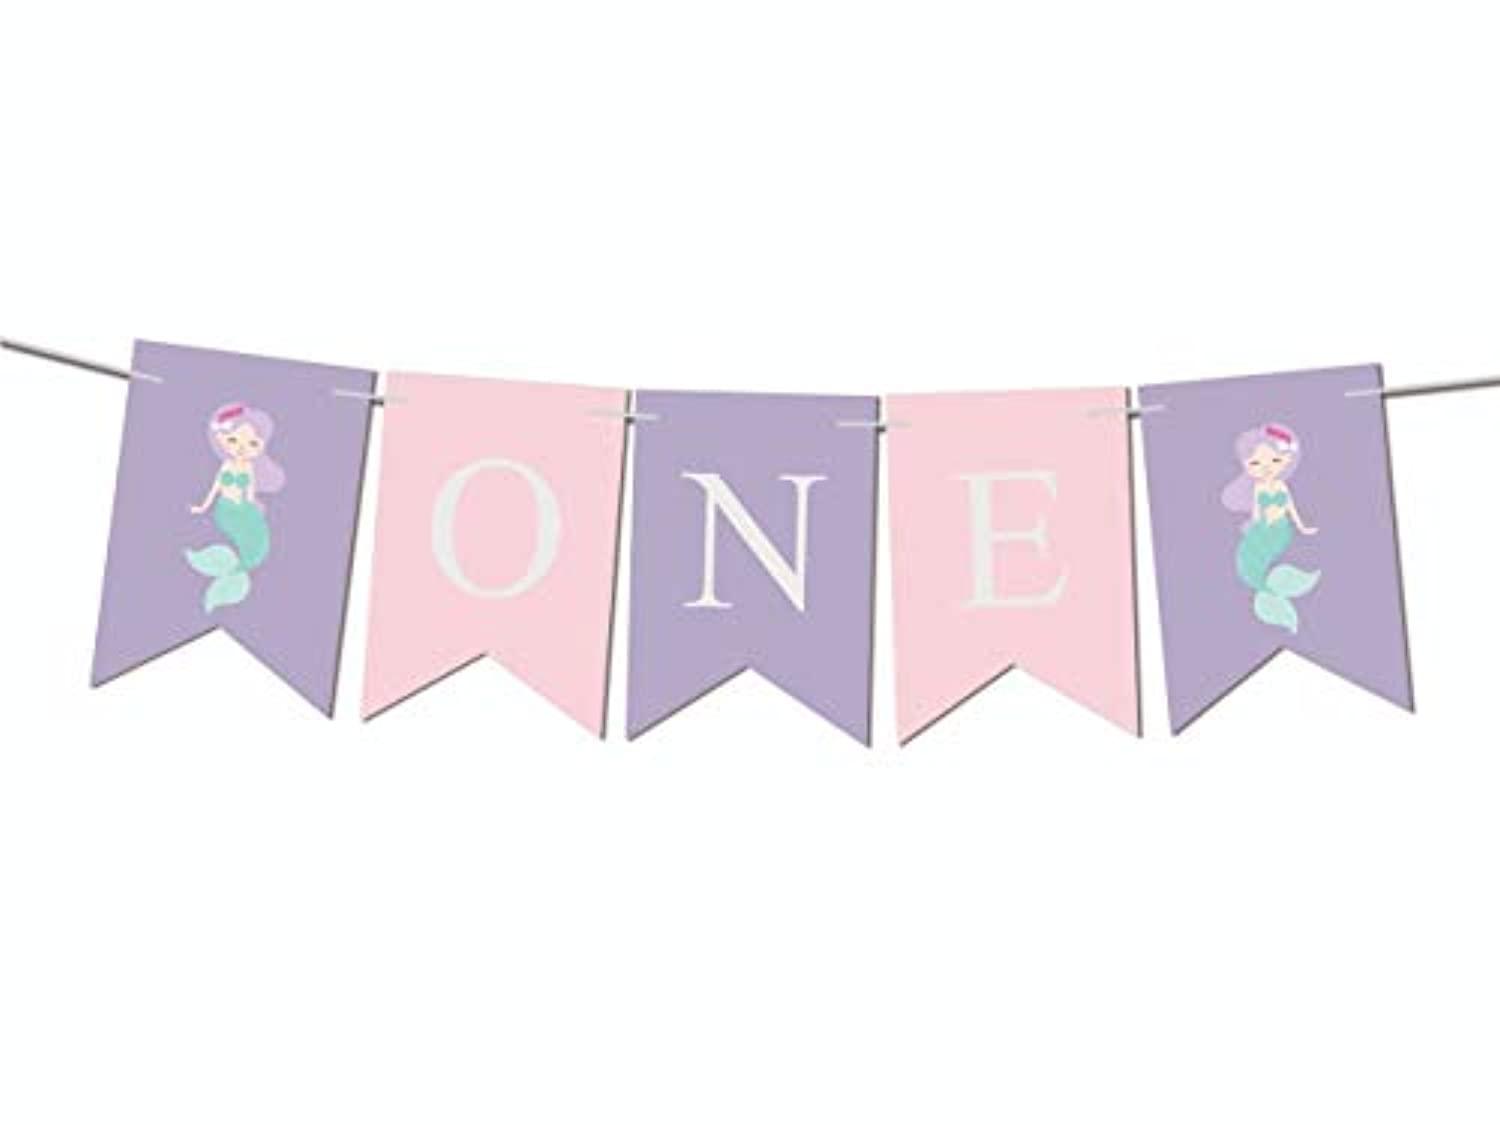 I AM ONE Banner Mermaid Party Supplies Birthday Decorations-Ocean